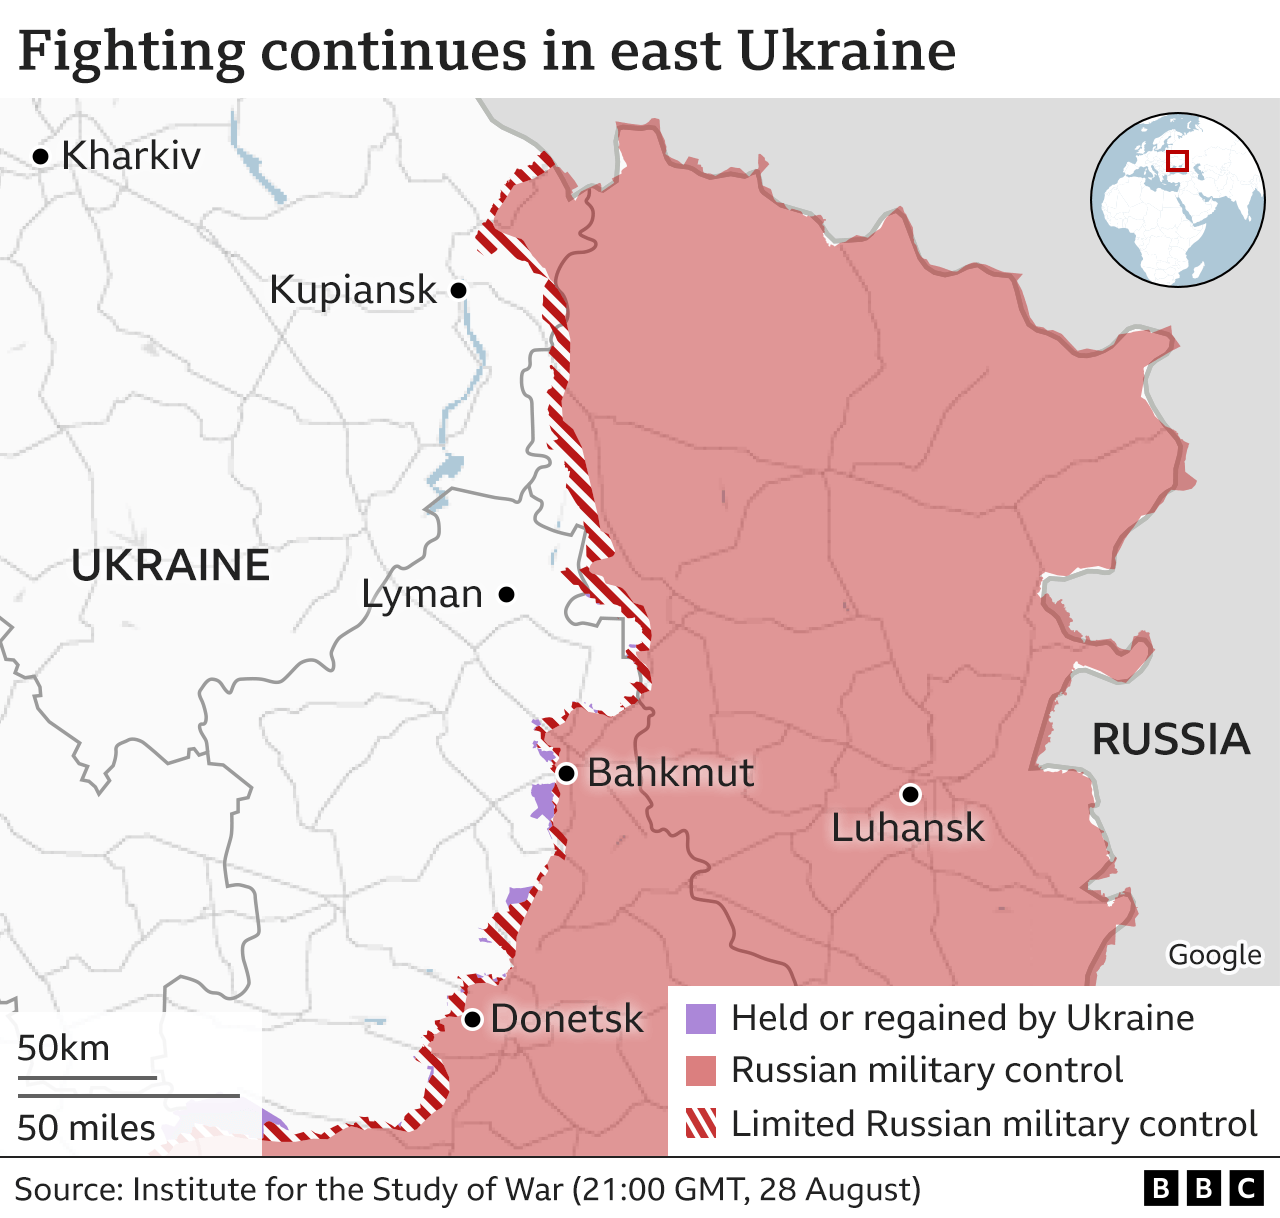 Fighting continues in east Ukraine, map shows territorial gains made by Ukraine and Russia